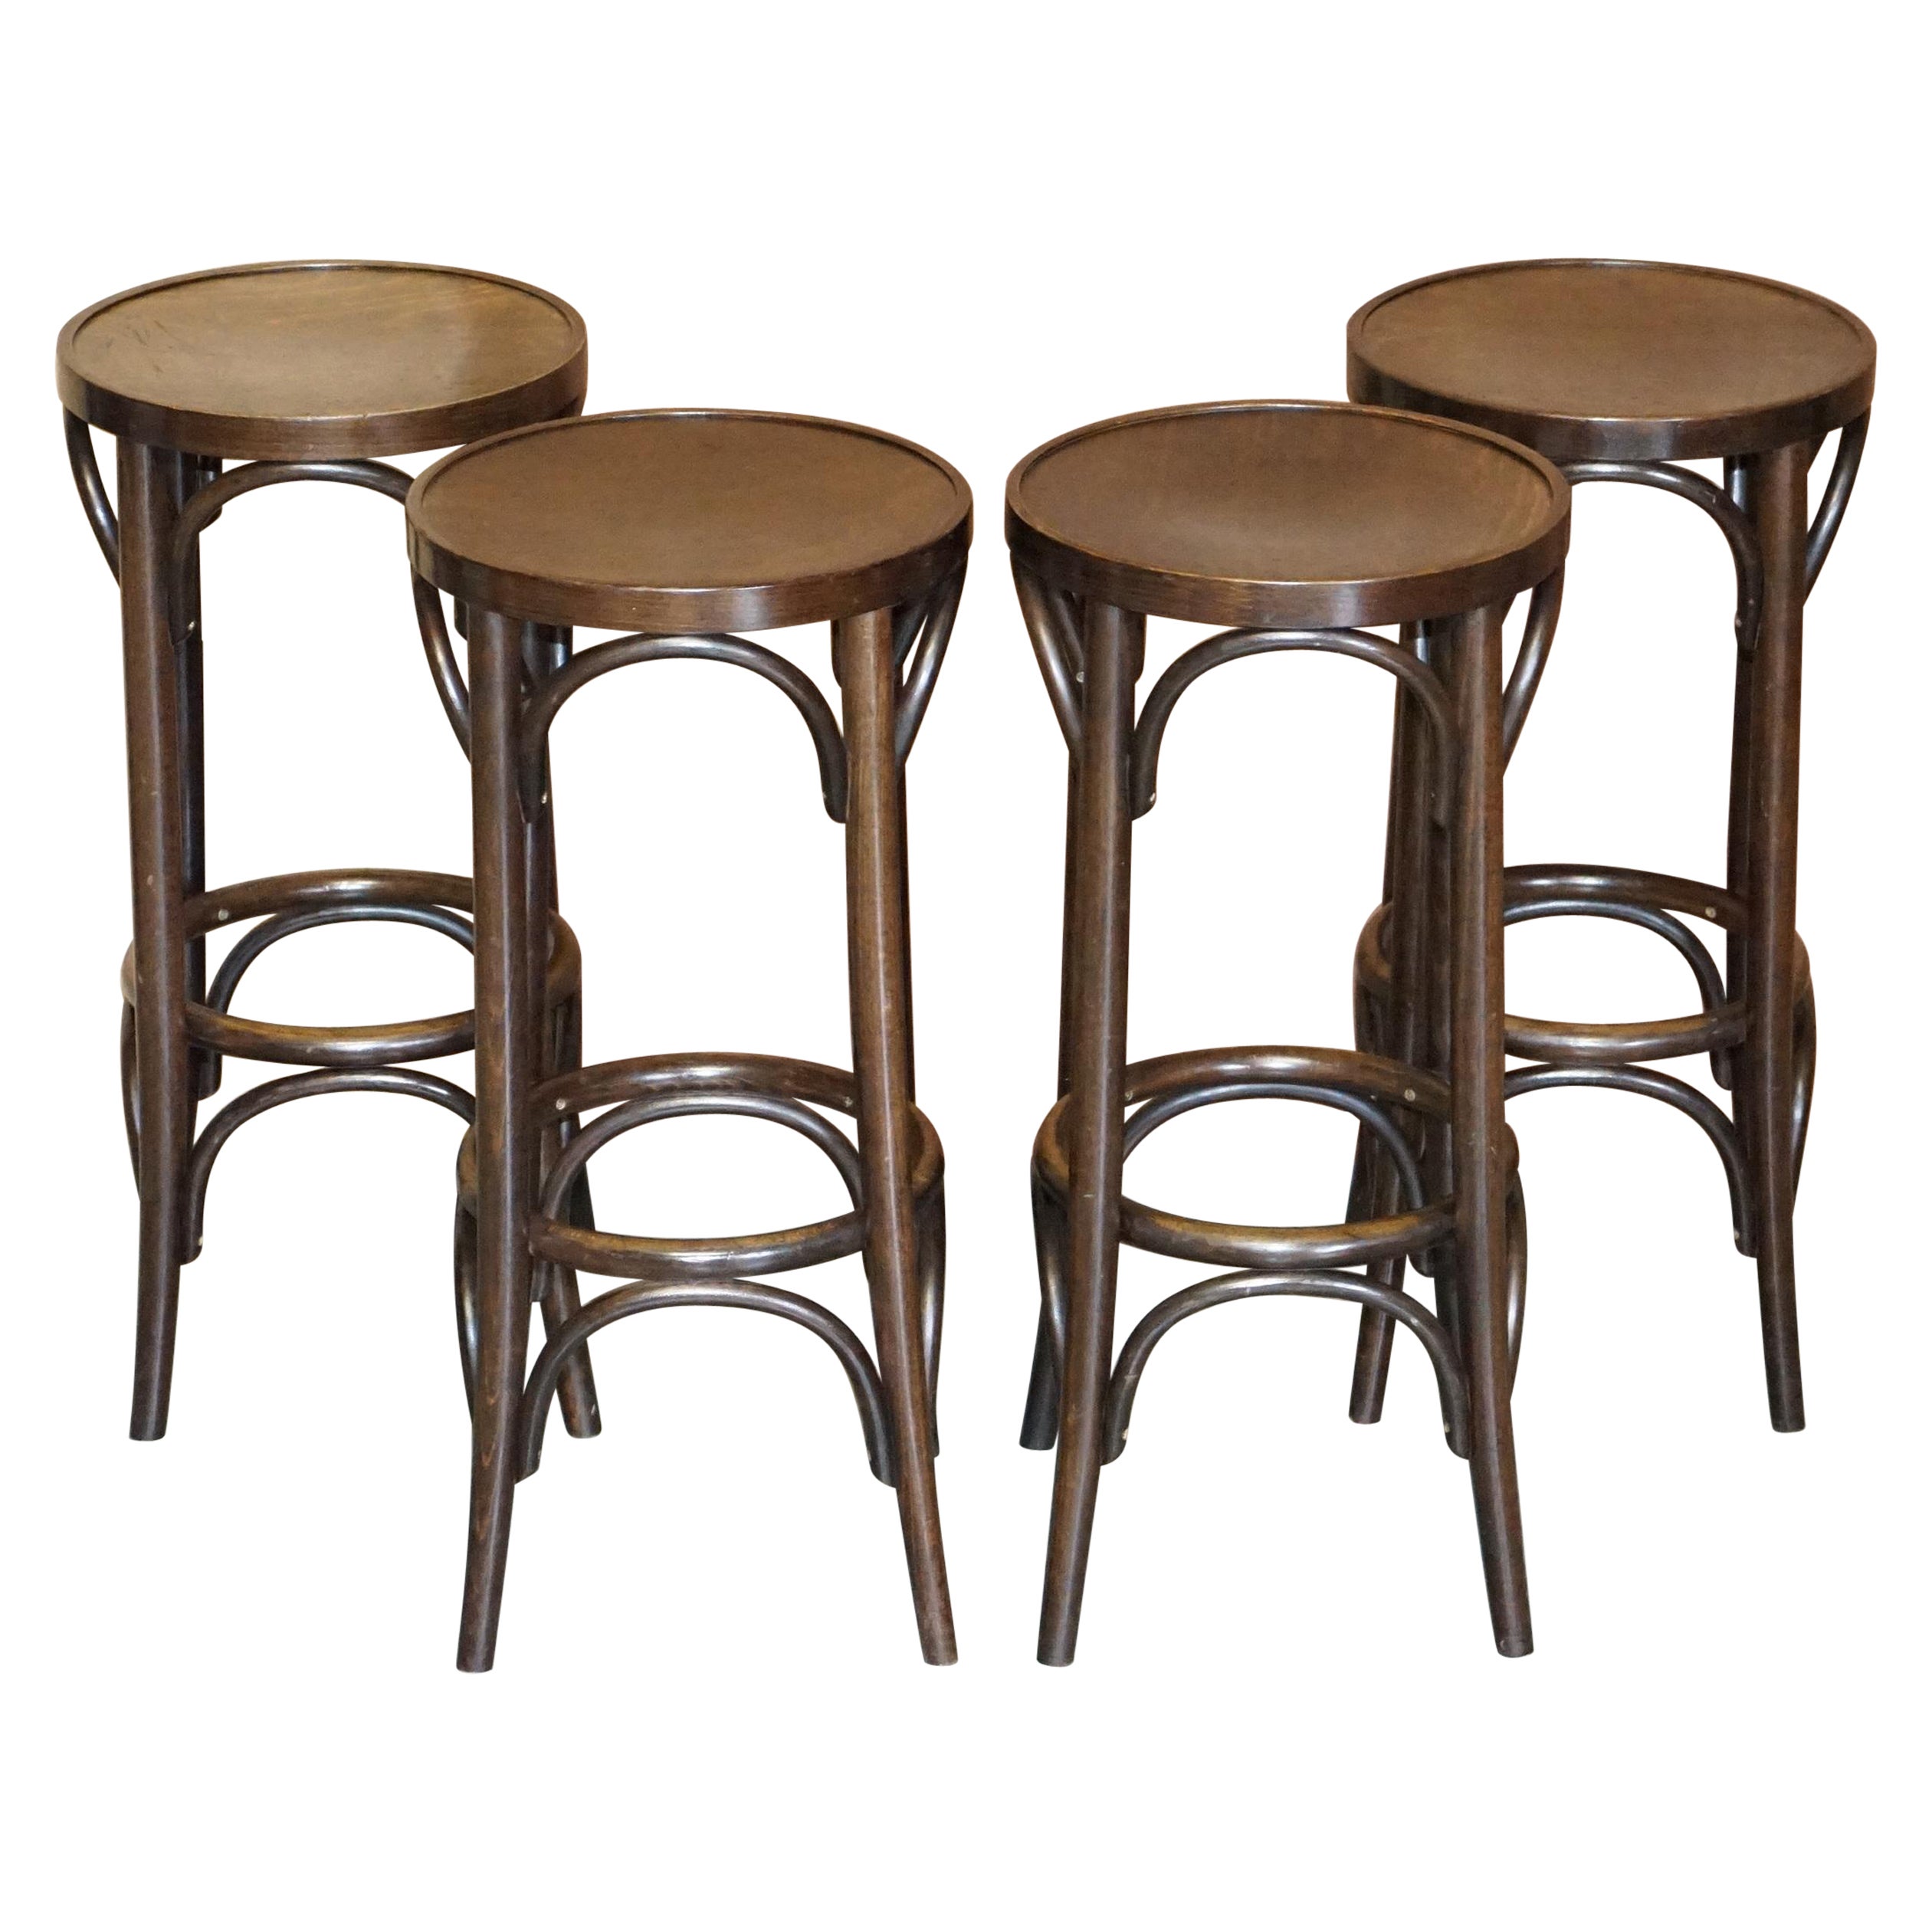 Four Vintage Bentwood Thonet Bar Stools Lovely Suite Very Comfortable X4